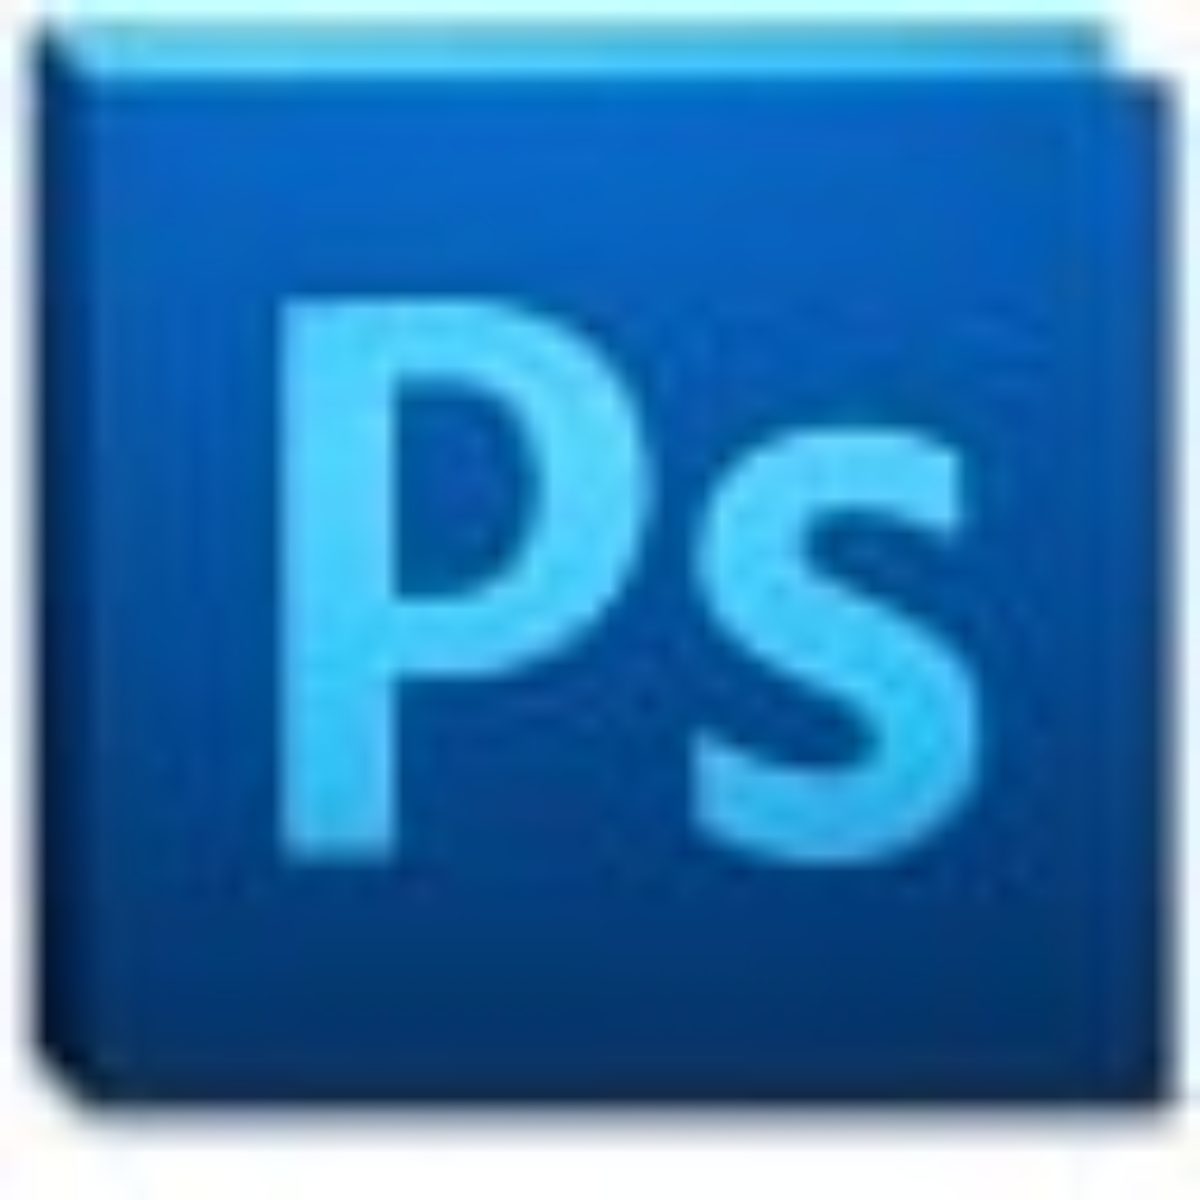 download photoshop for mac cs5